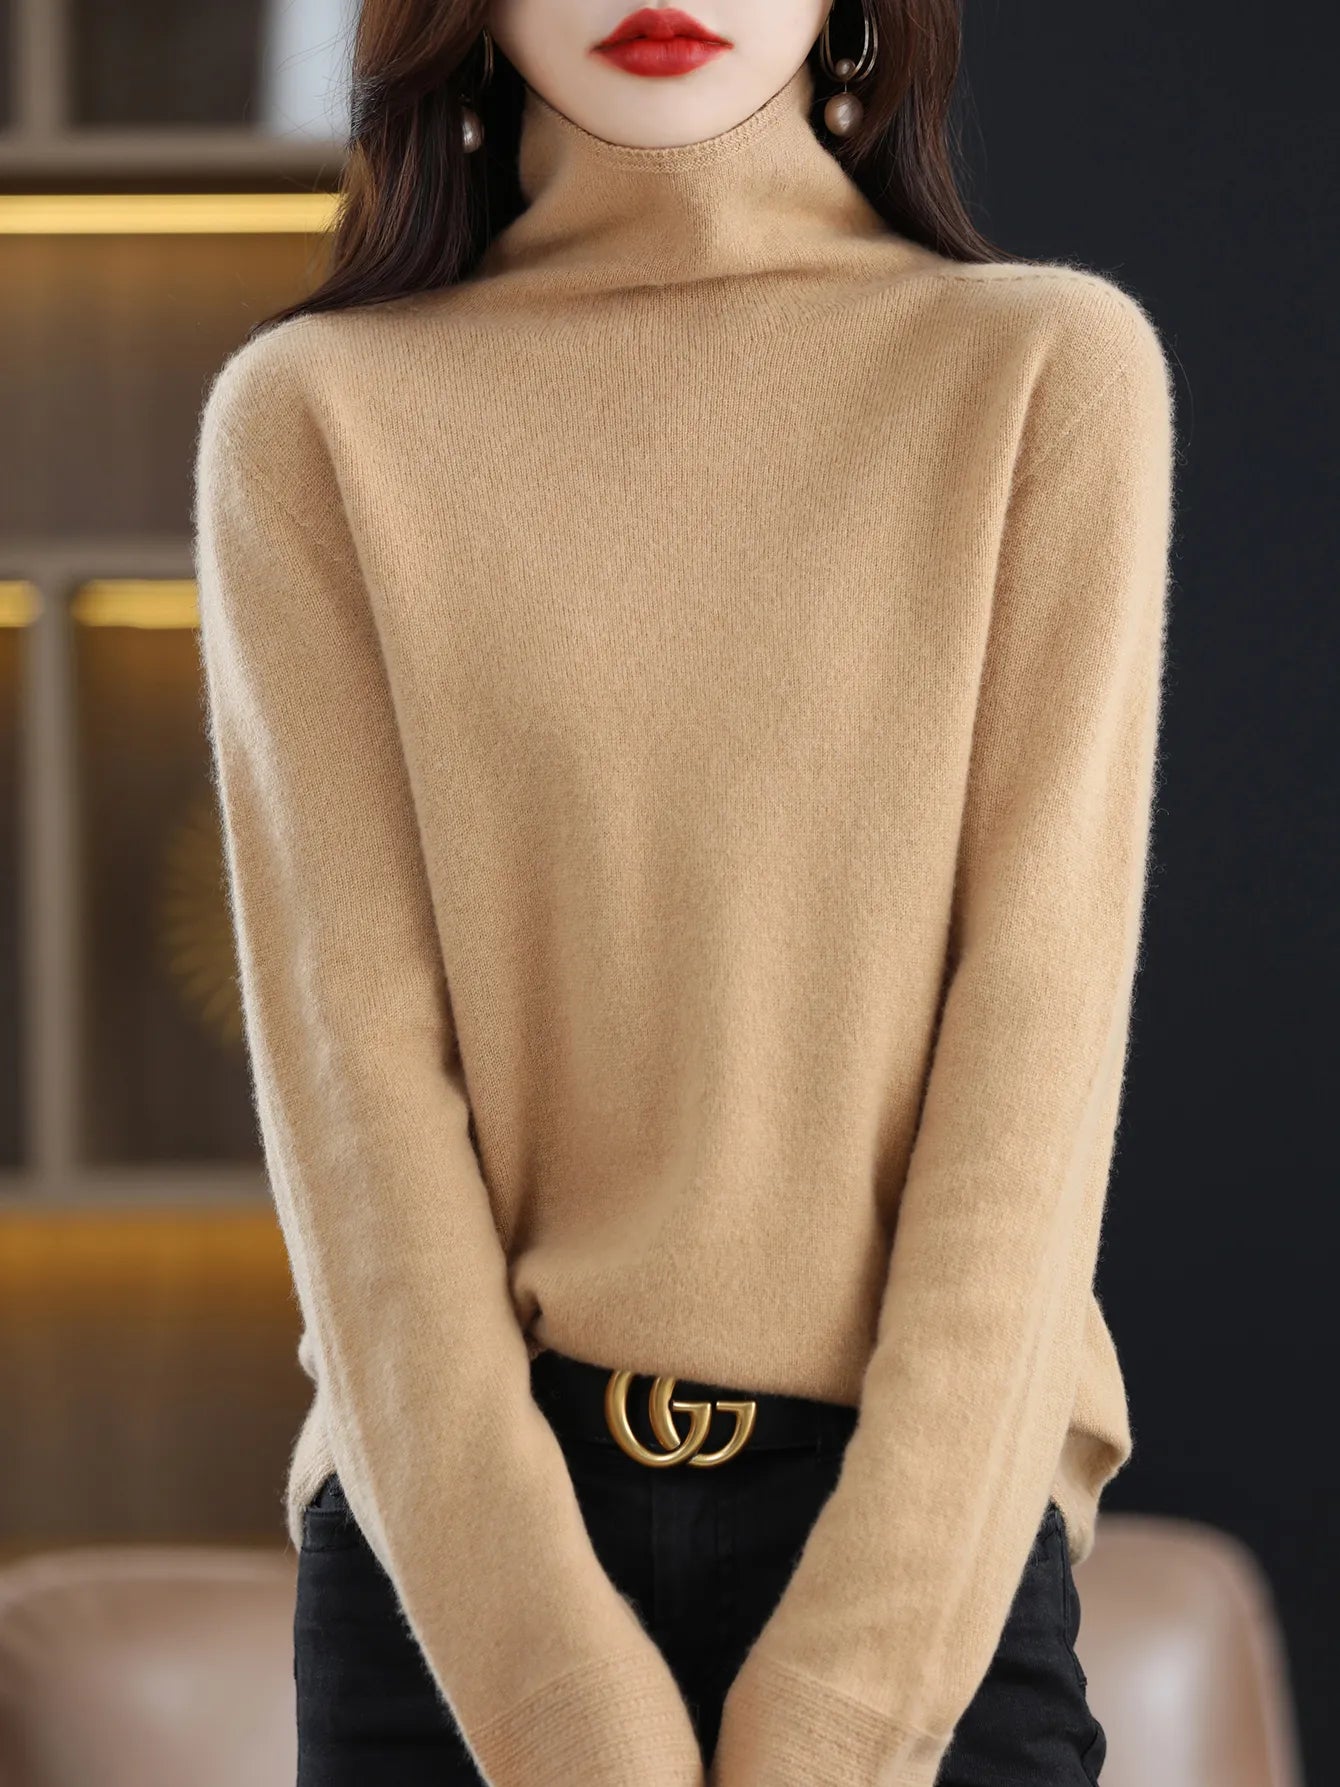 Turtleneck Sweater 100% Merino Wool Sweater Women 2023 Fall Winter Basic Soft Warm Pullovers Long Sleeve Knit Top Female Clothes